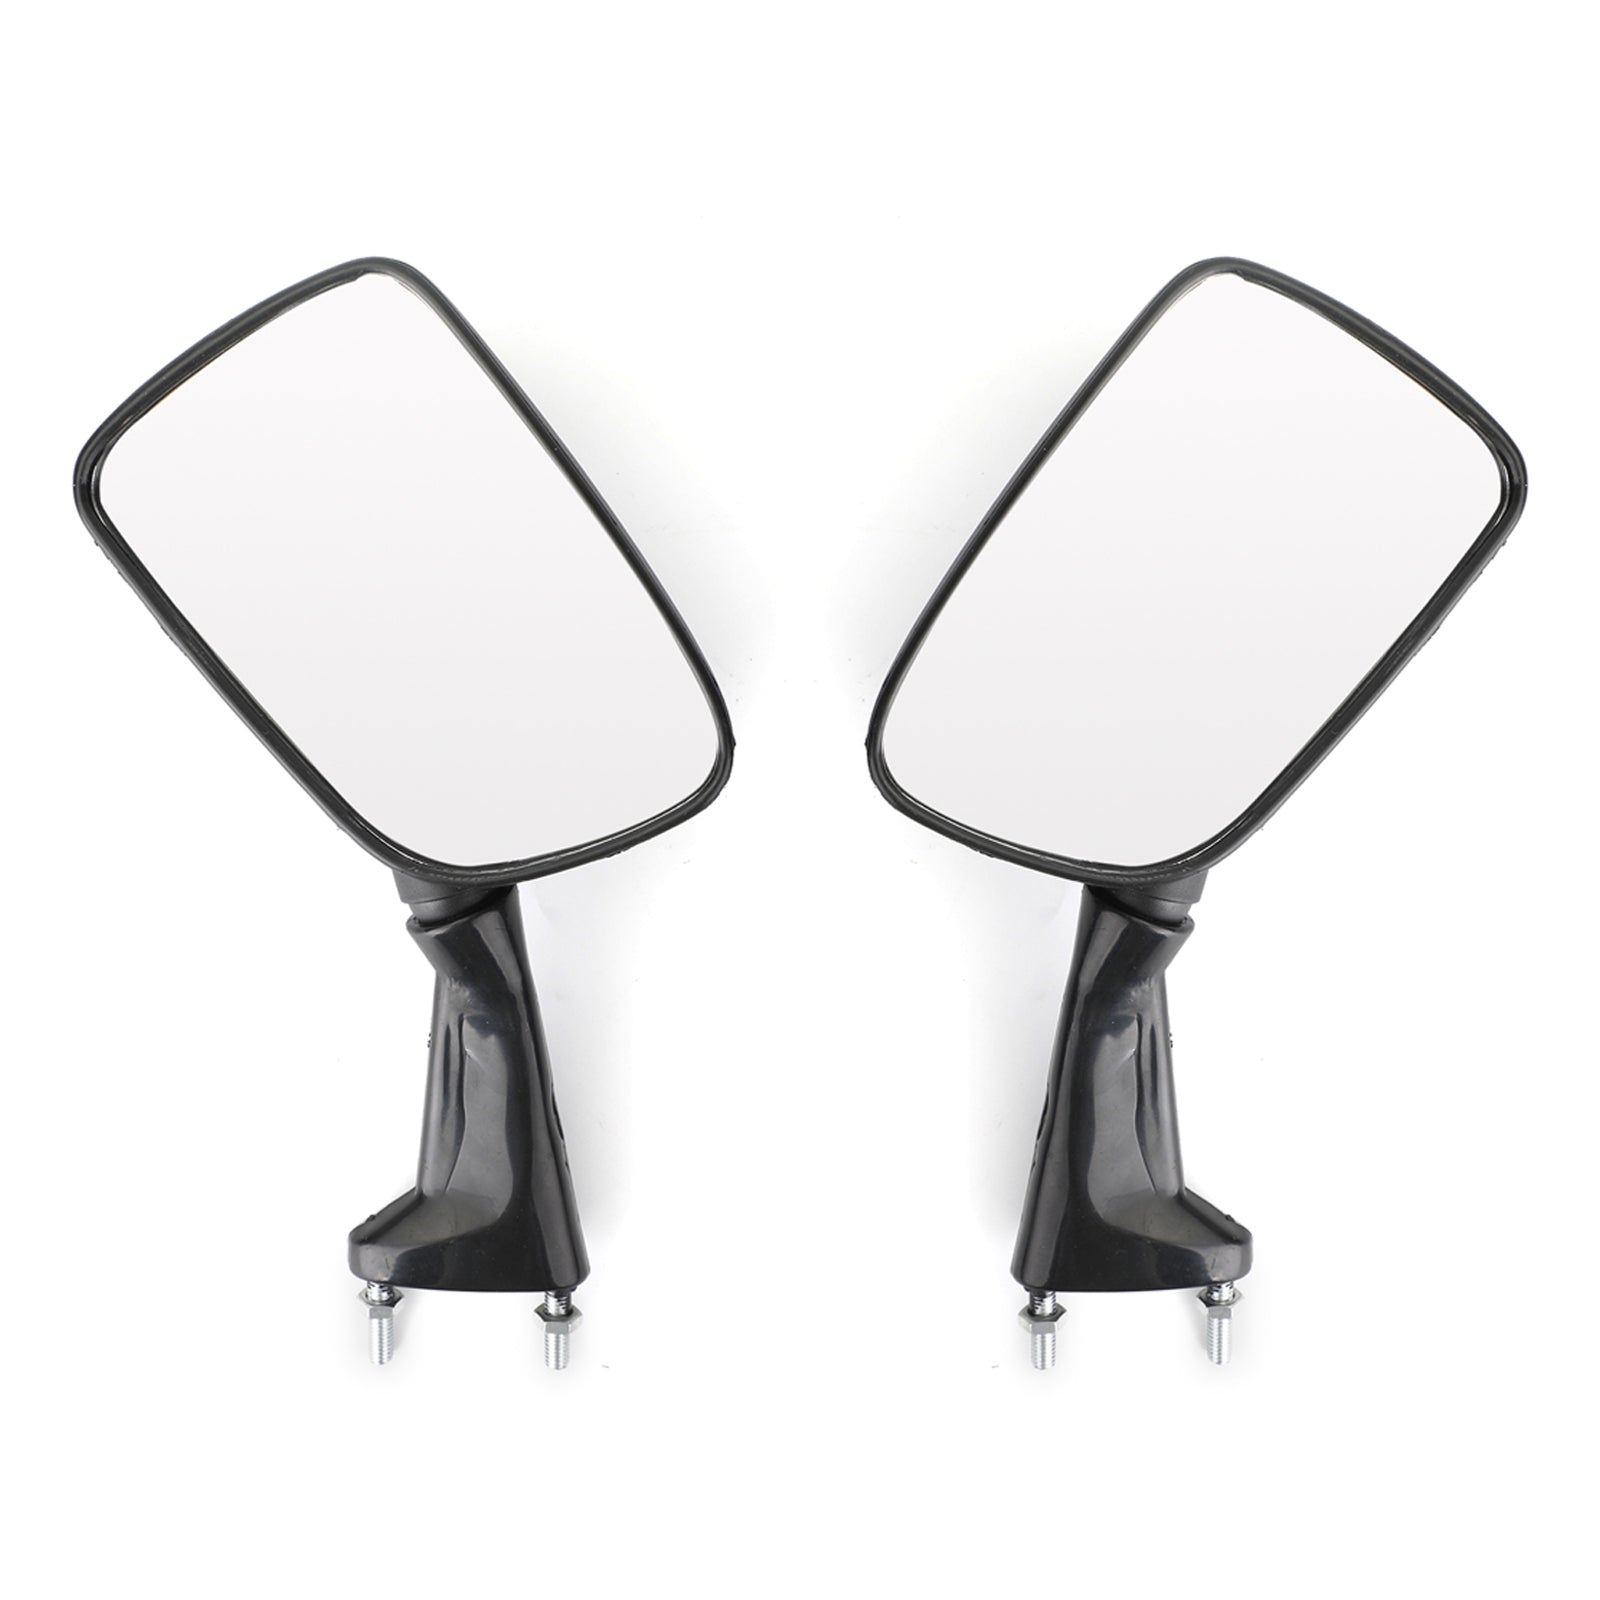 Pair Rearview Mirrors Left & Right Fit for Yamaha TZR 250 TZR250 TZM 150 Generic